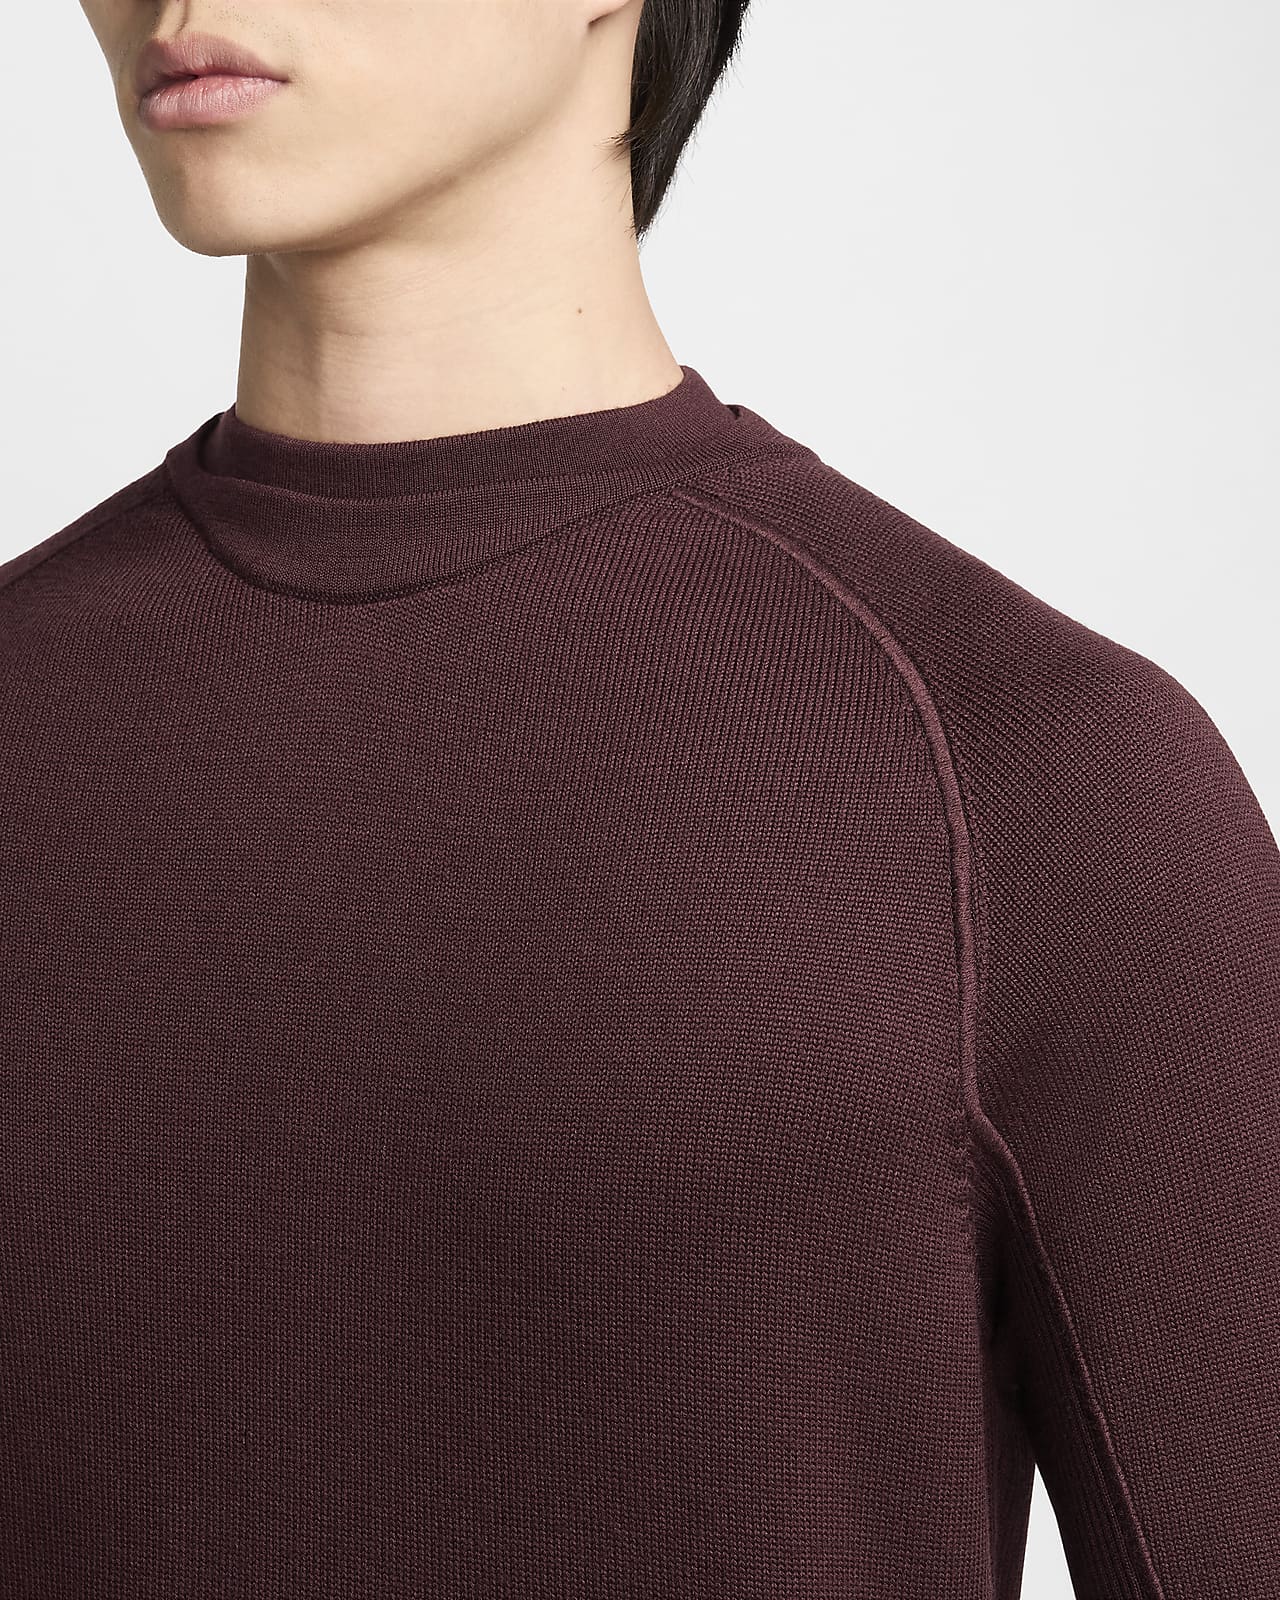 Nike Every Stitch Considered Men's Long-Sleeve Computational Knit Top